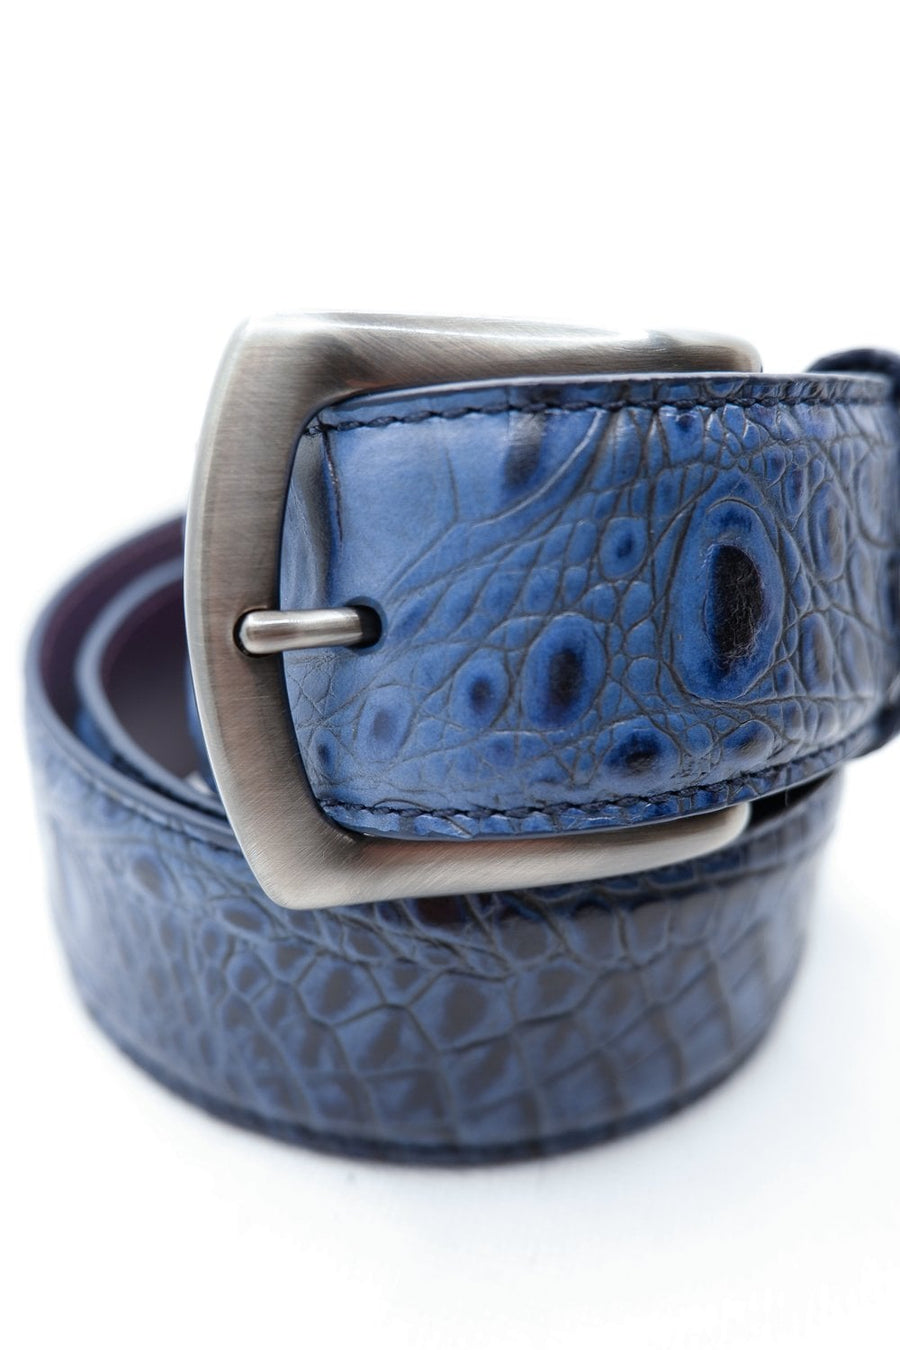 Buy the Elliot Rhodes Coco Jenny Mock Croc Belt in Blue at Intro. Spend £50 for free UK delivery. Official stockists. We ship worldwide.